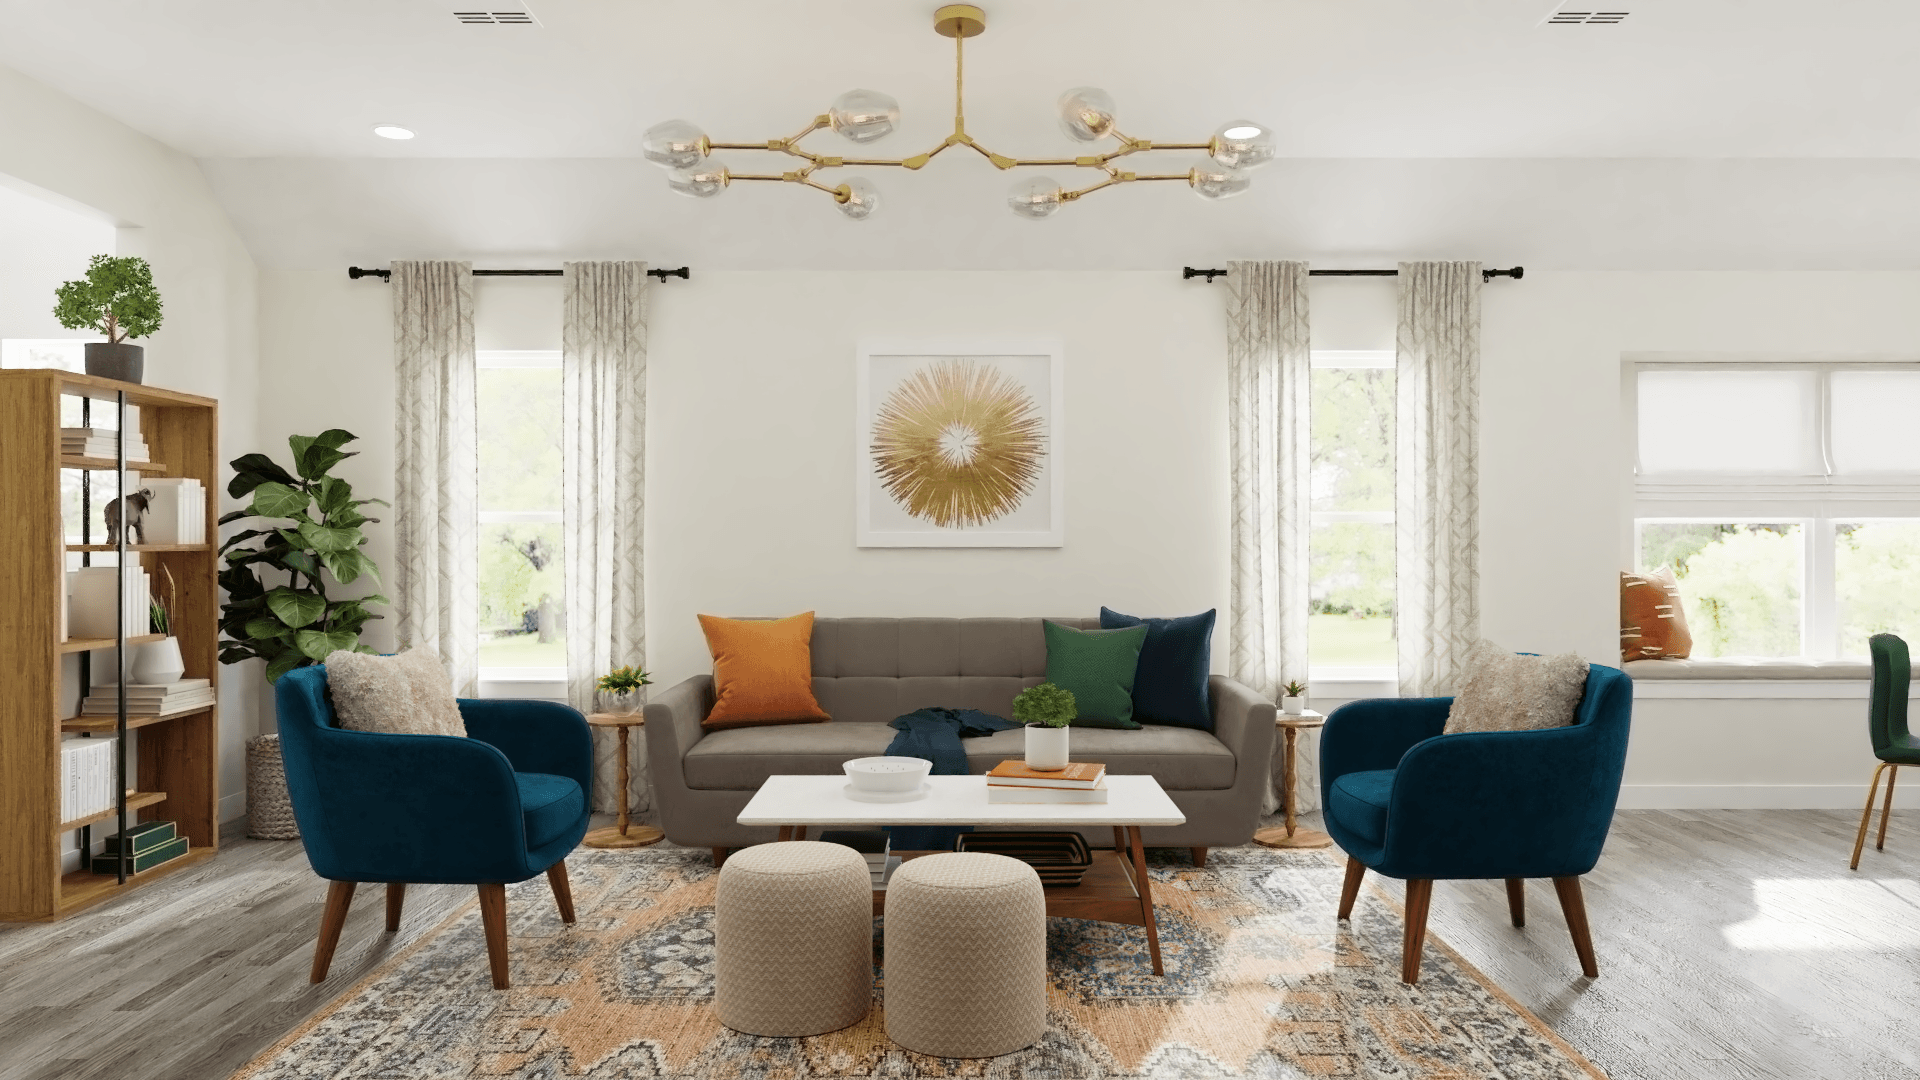 Mid Century Glam Living-Dining Room With Metallic Accents